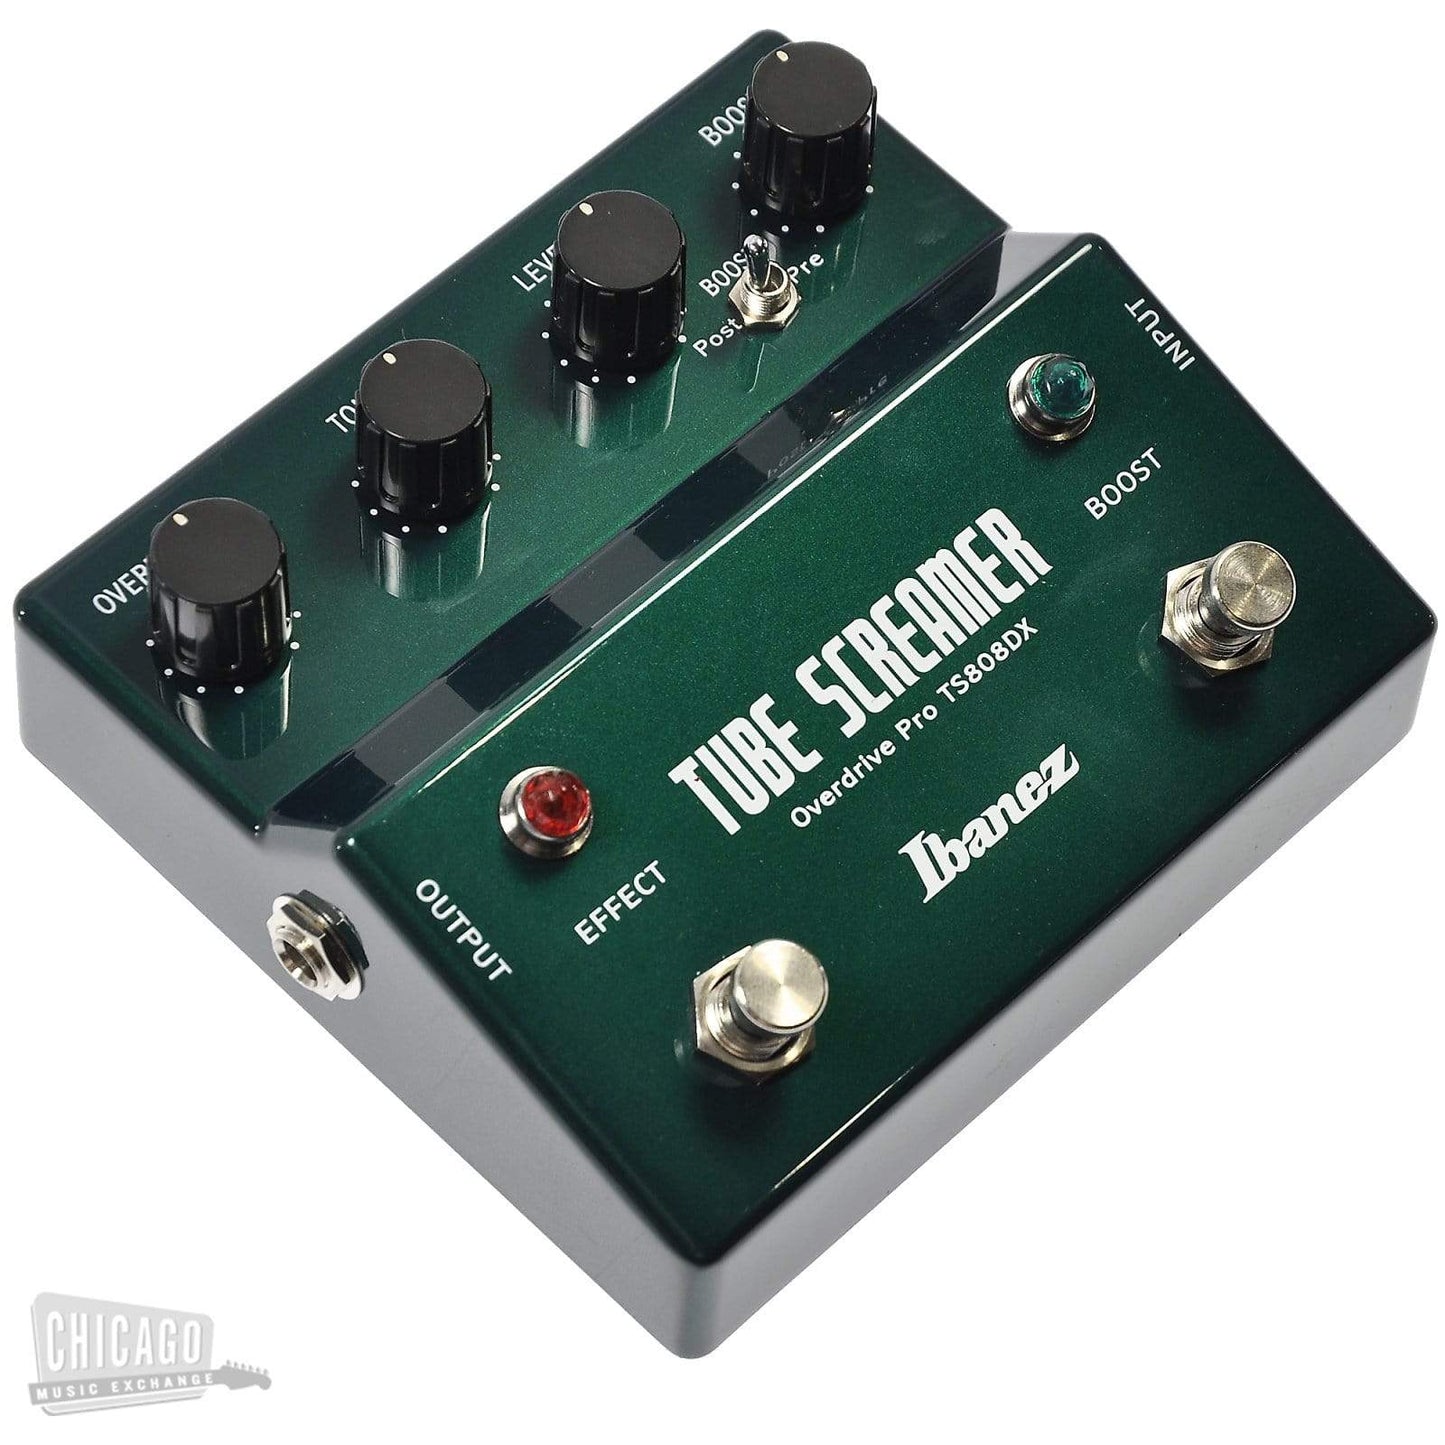 Ibanez TS808DX Tube Screamer Pro Deluxe w/Booster NEW Effects and Pedals / Overdrive and Boost